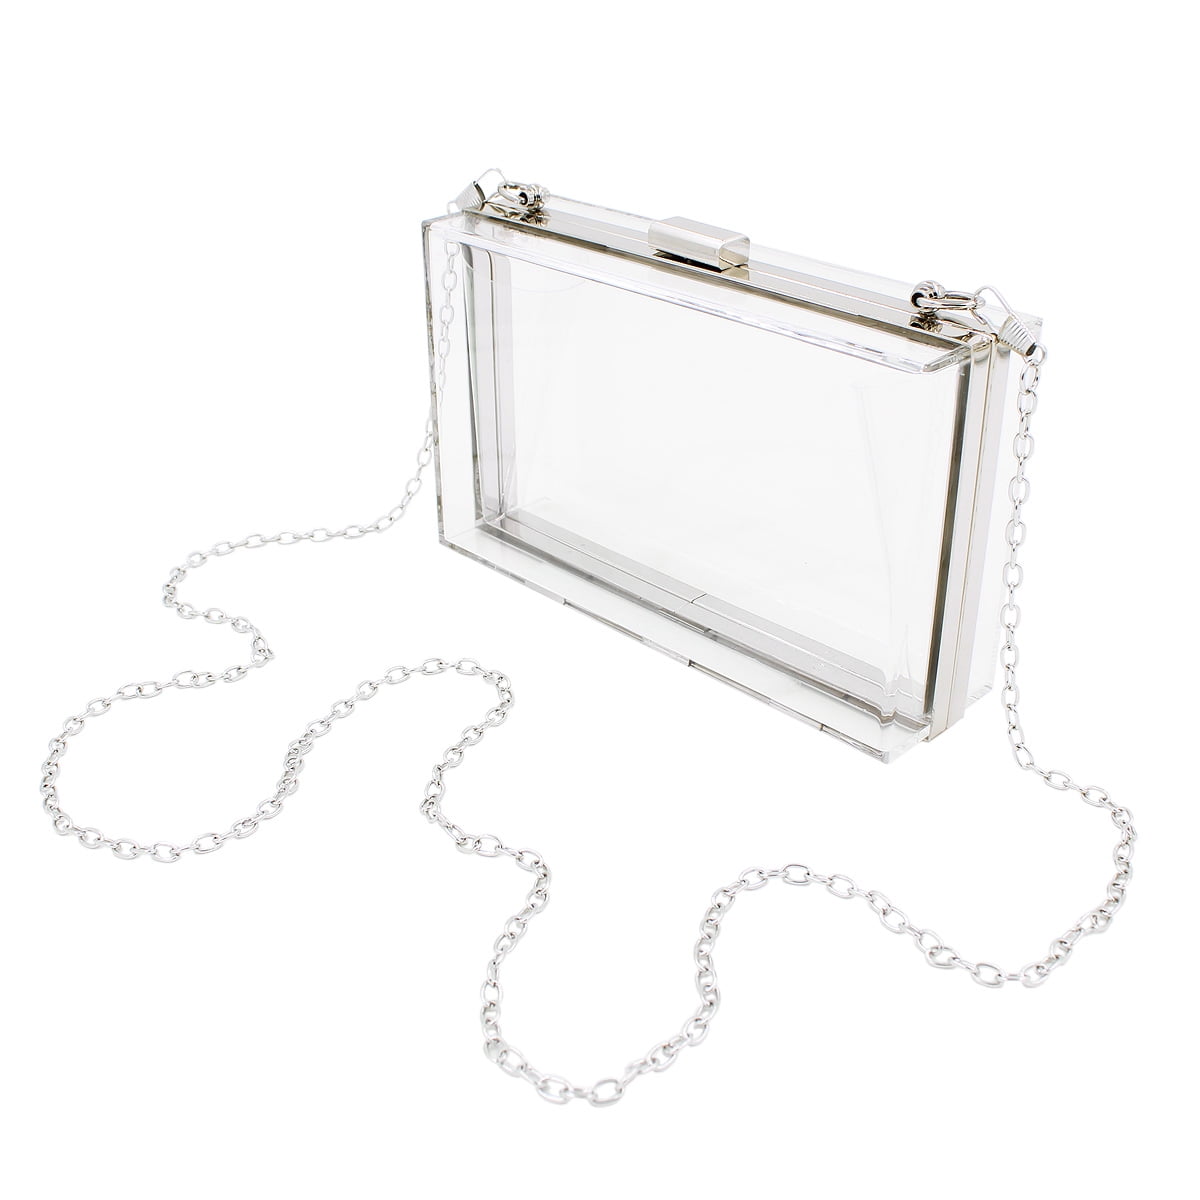 Bags, Tinted Clear Acrylic Box Clutch With Beaded Handle